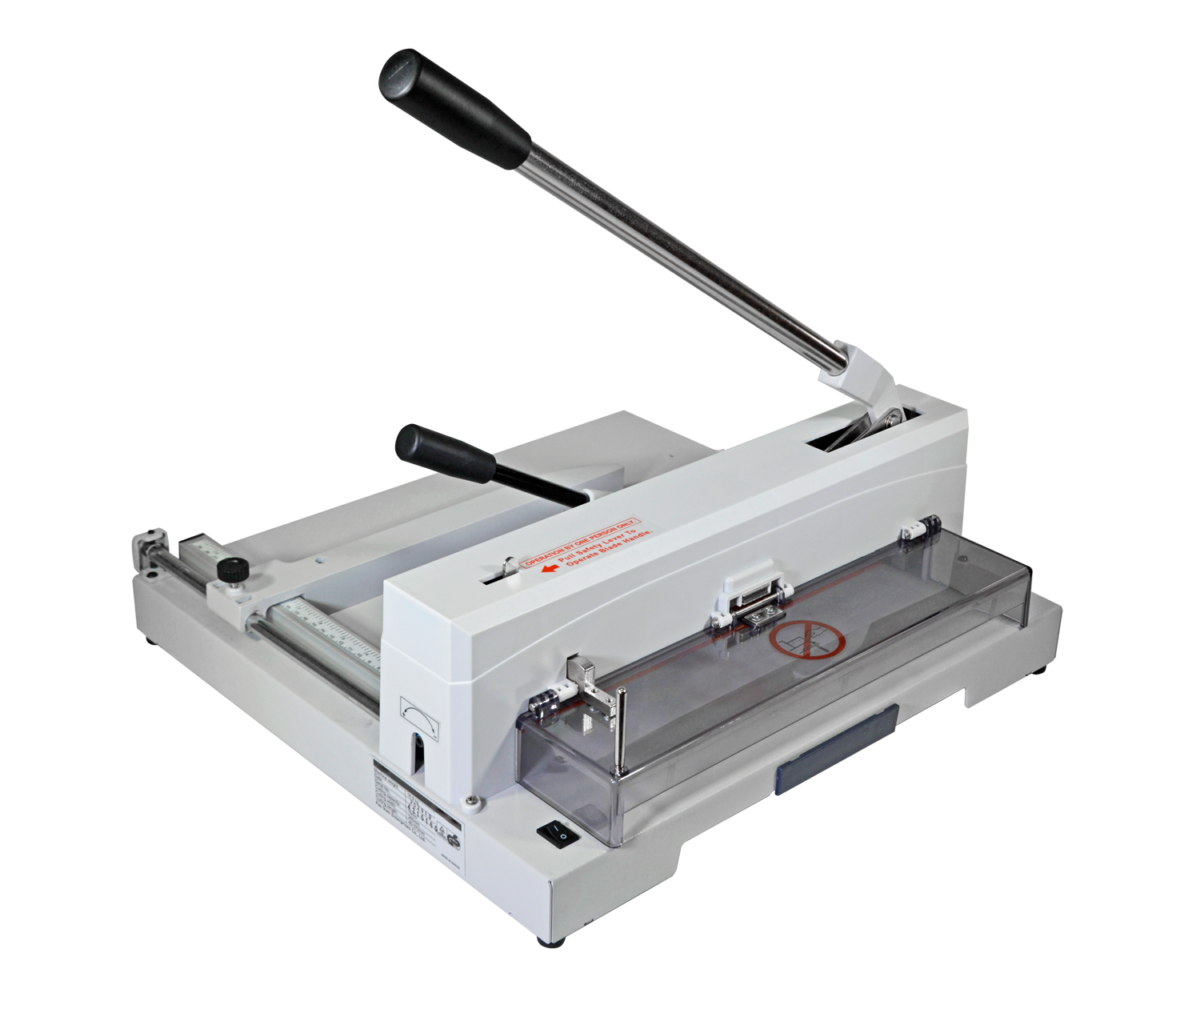 What is a Manual Paper Cutter?